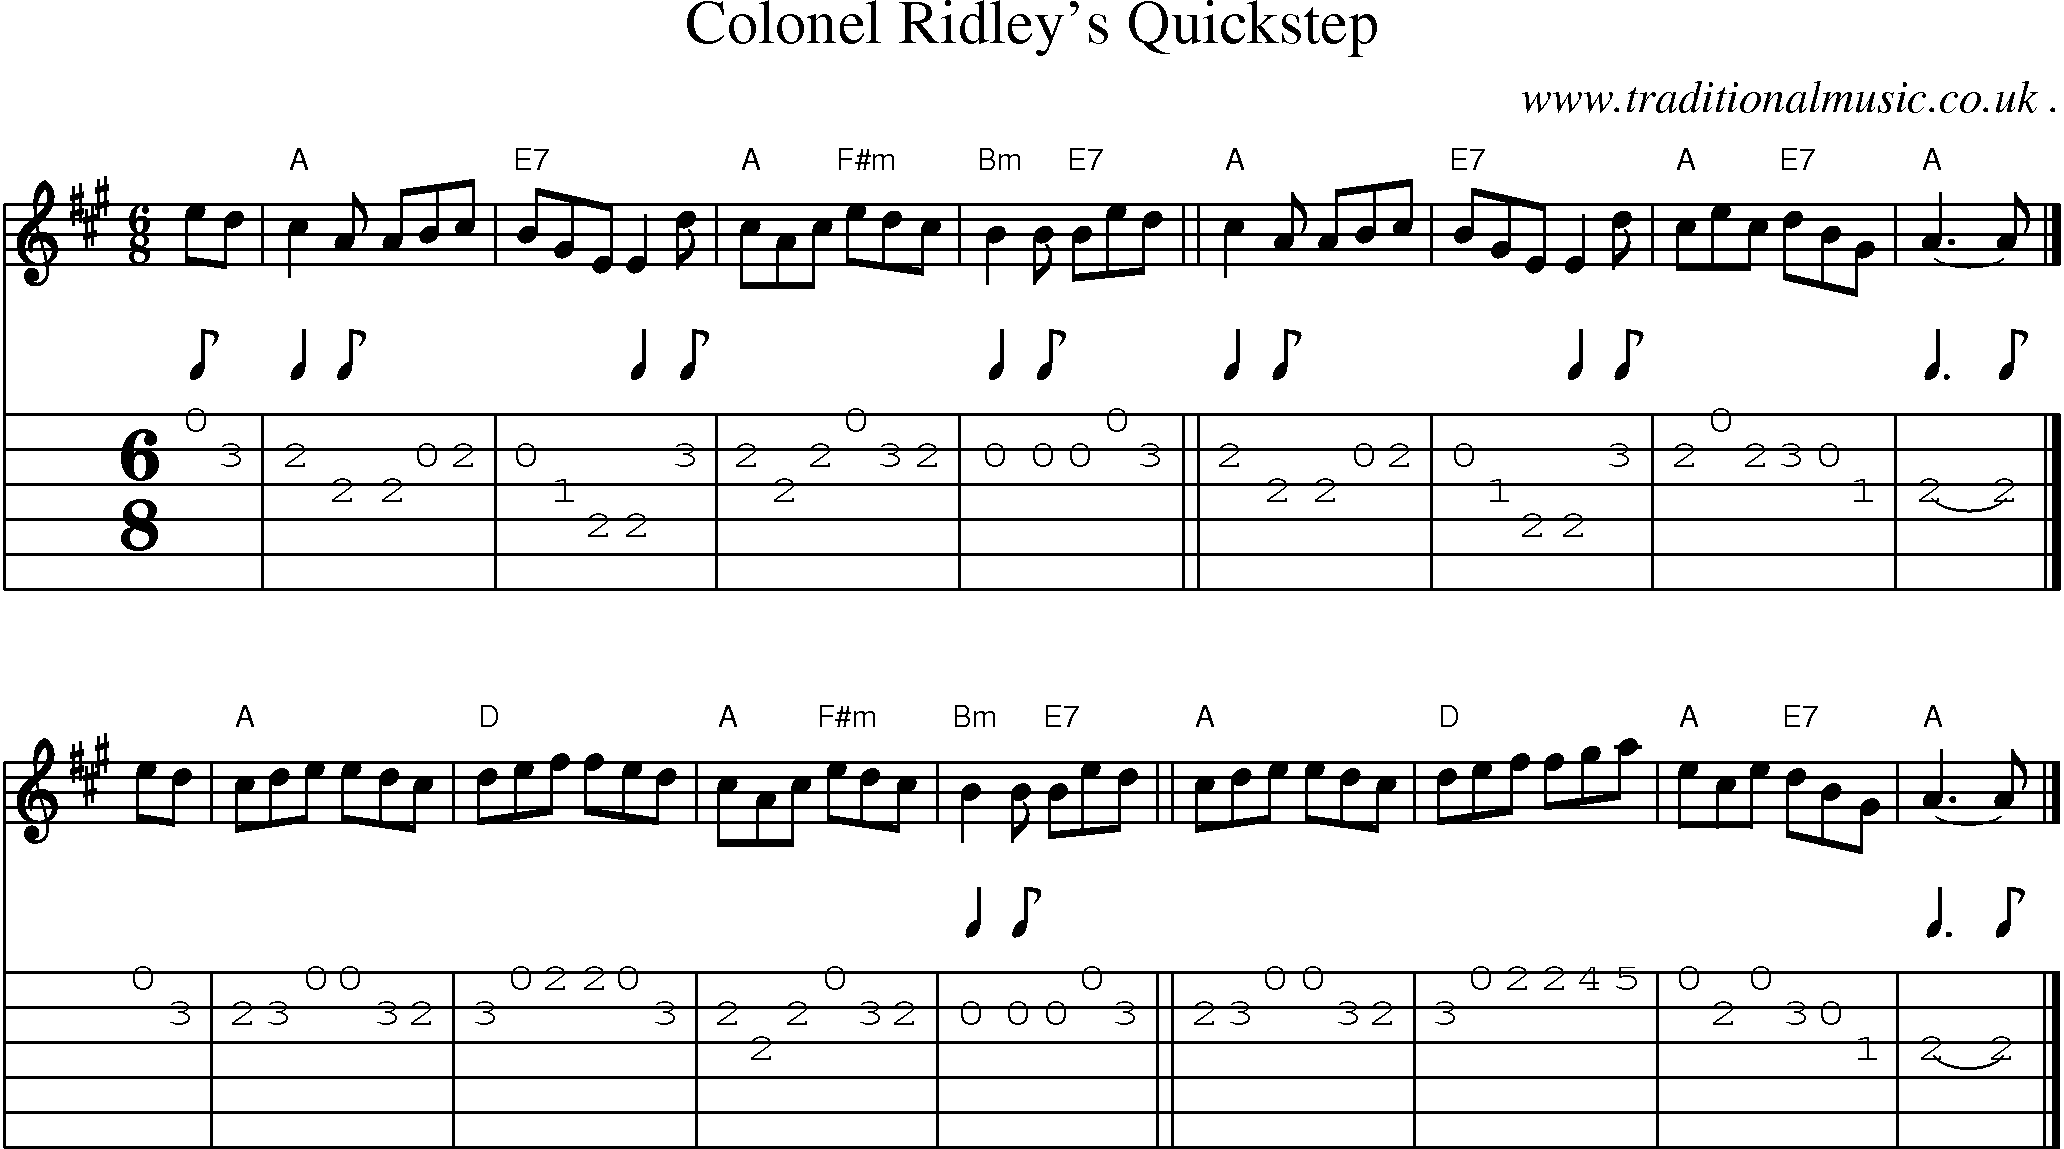 Sheet-music  score, Chords and Guitar Tabs for Colonel Ridleys Quickstep